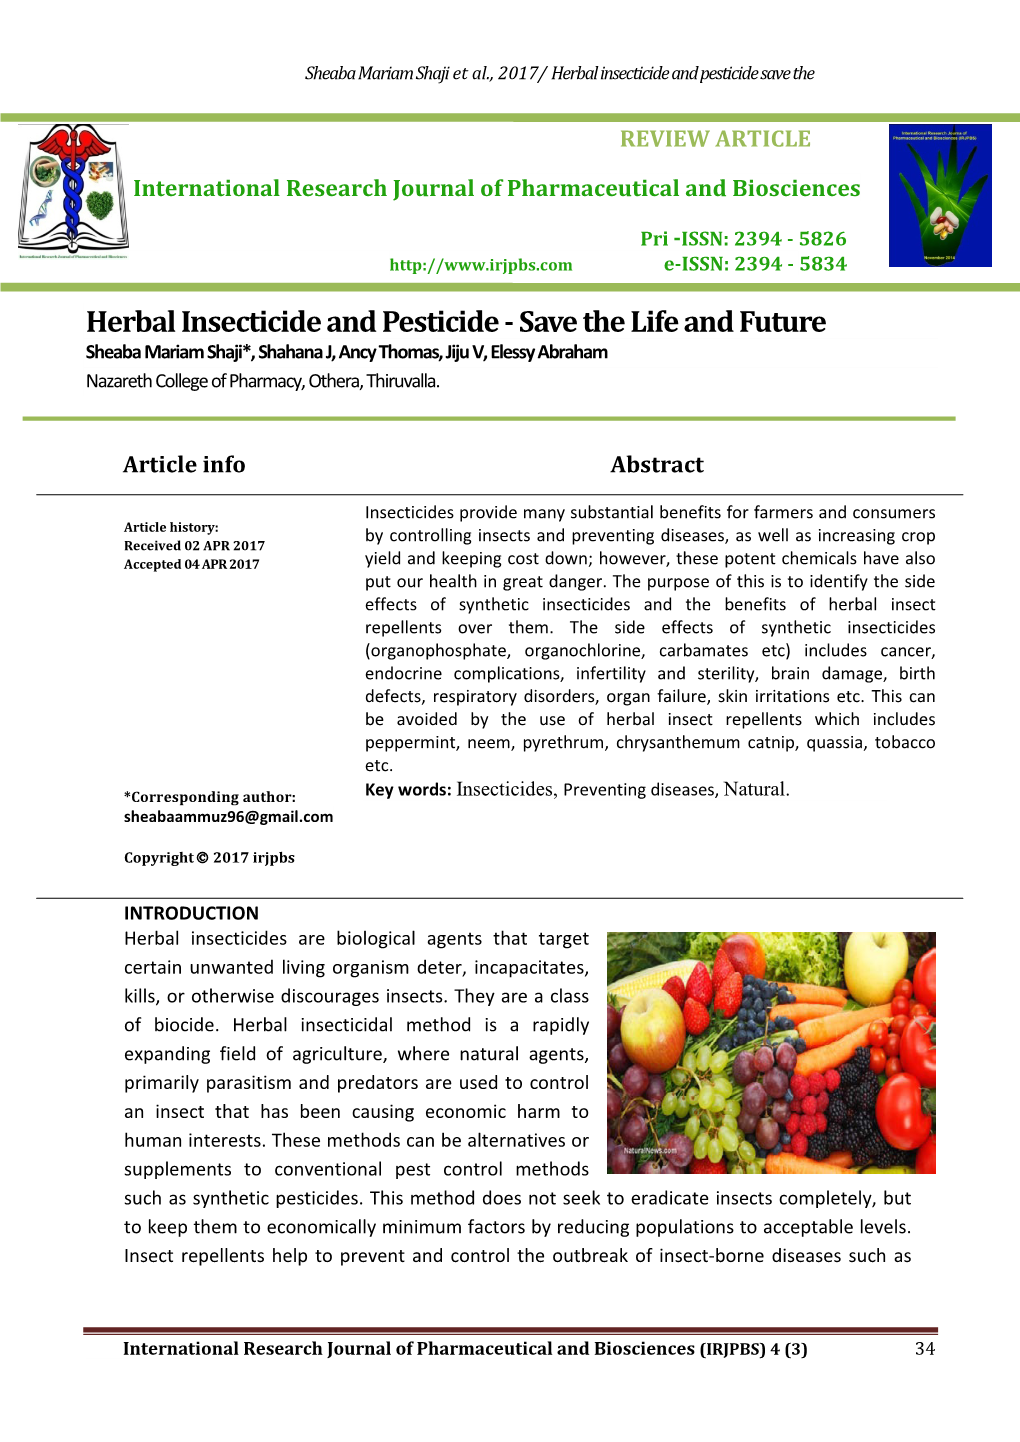 Herbal Insecticide and Pesticide Save The